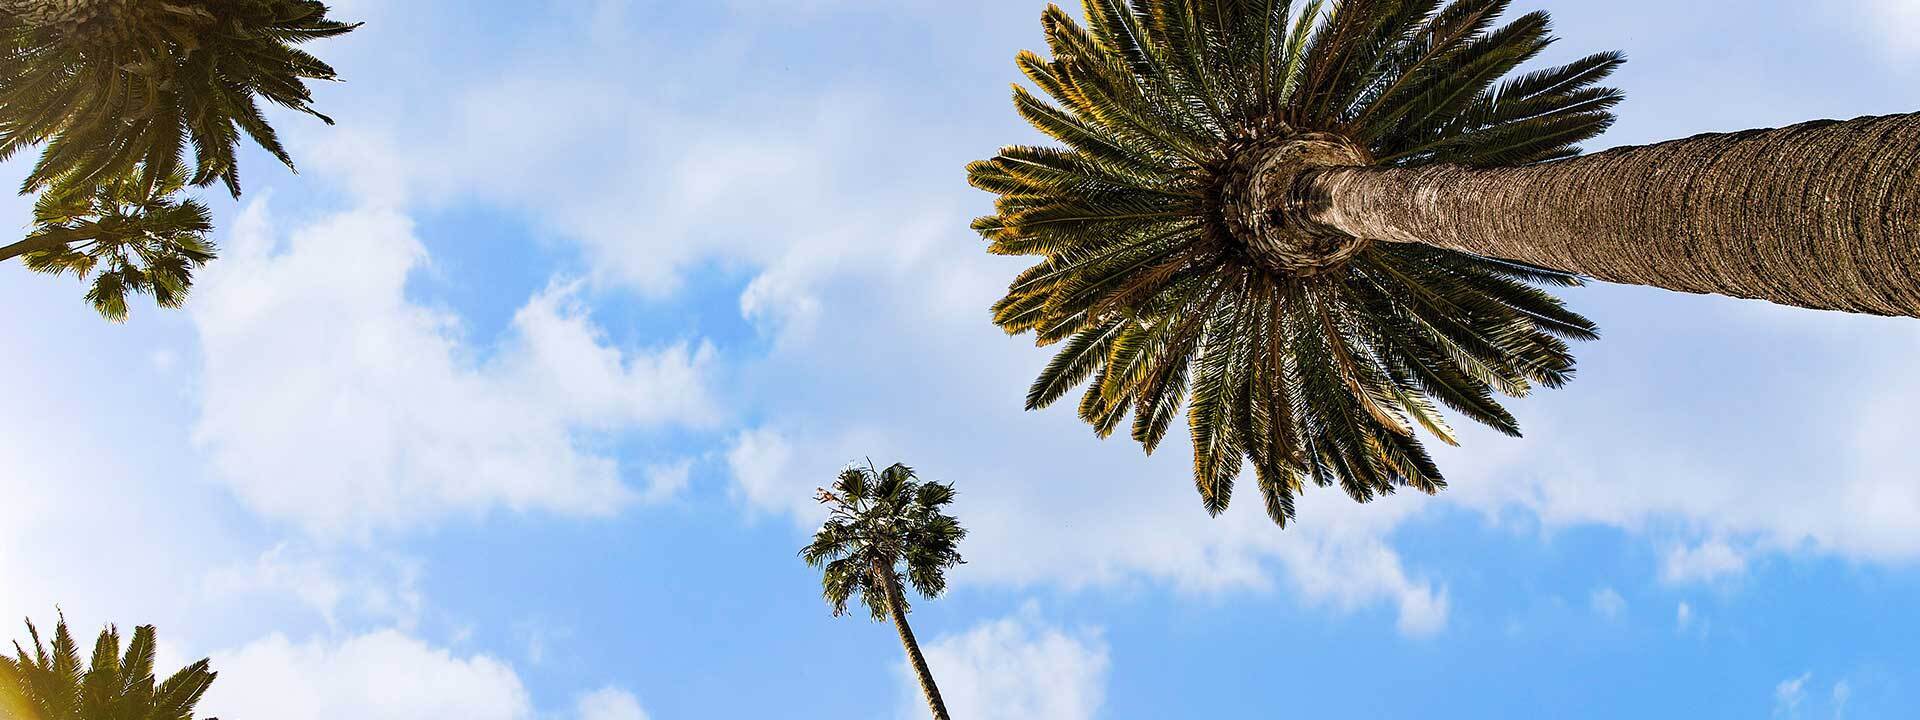 A vertical photo artistically captures the date palm tree's inherent natural elegance and beauty.